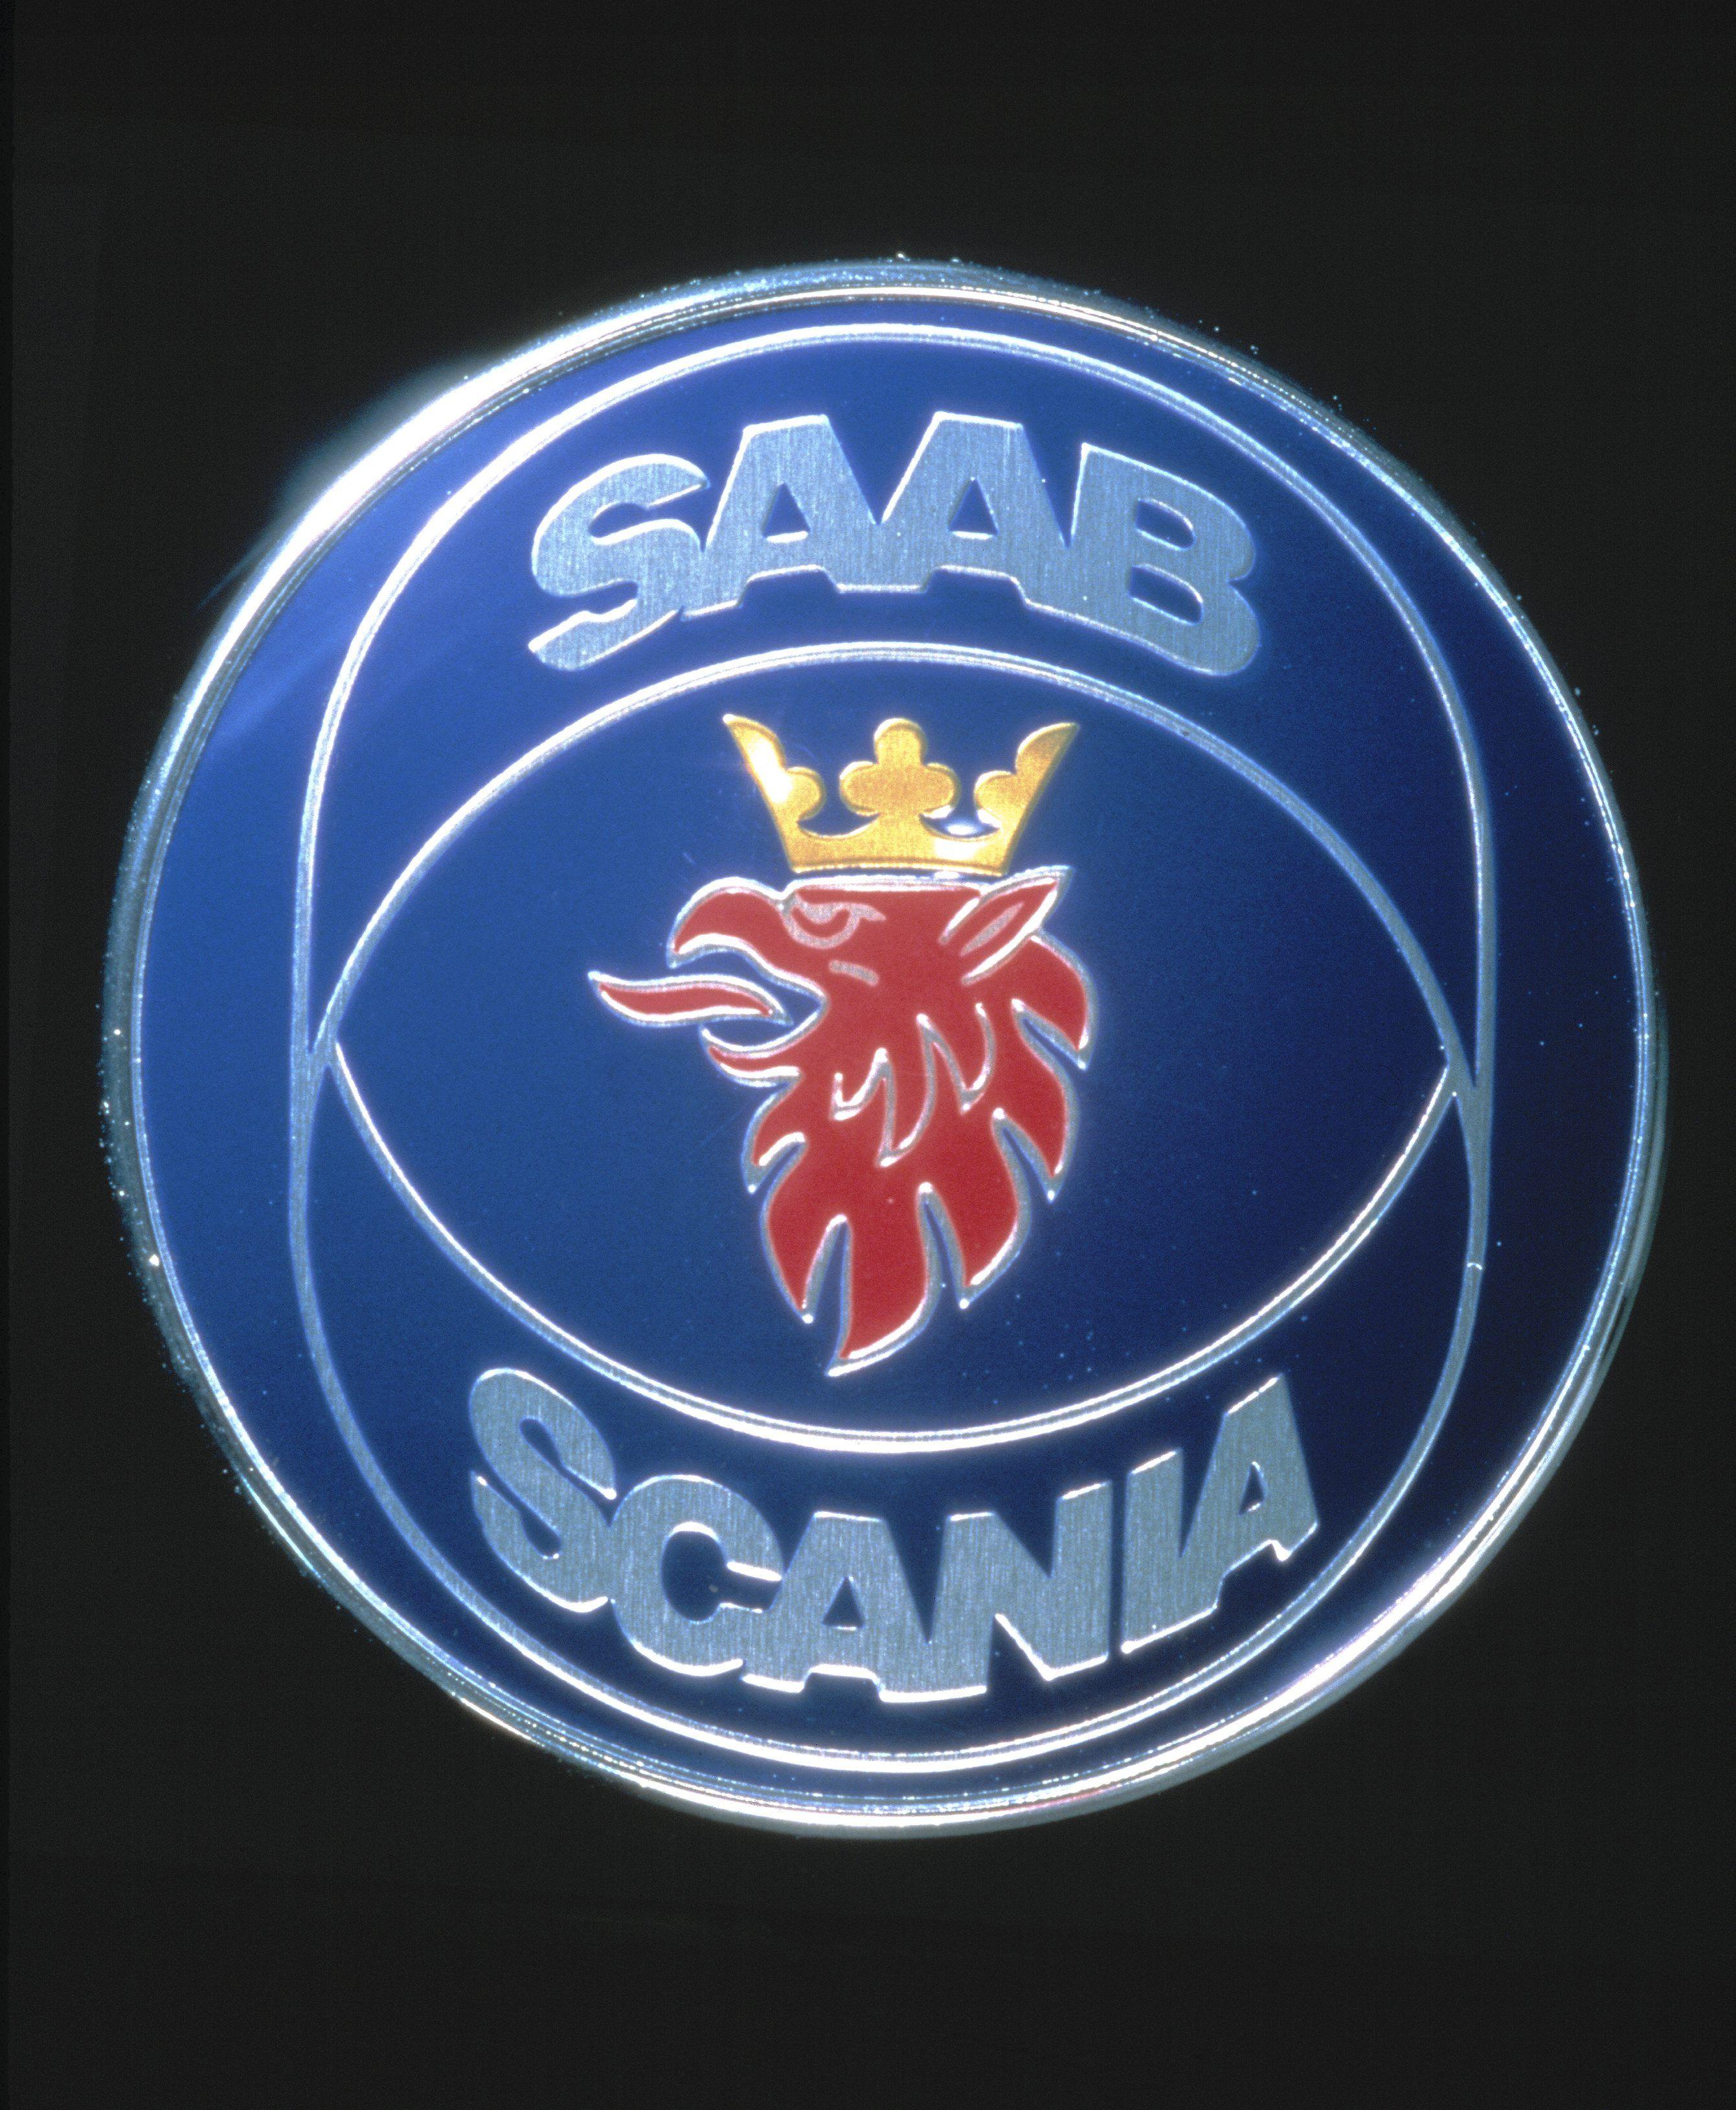 Saab-Scania Logo - Scania watches over its trademark | Scania Group